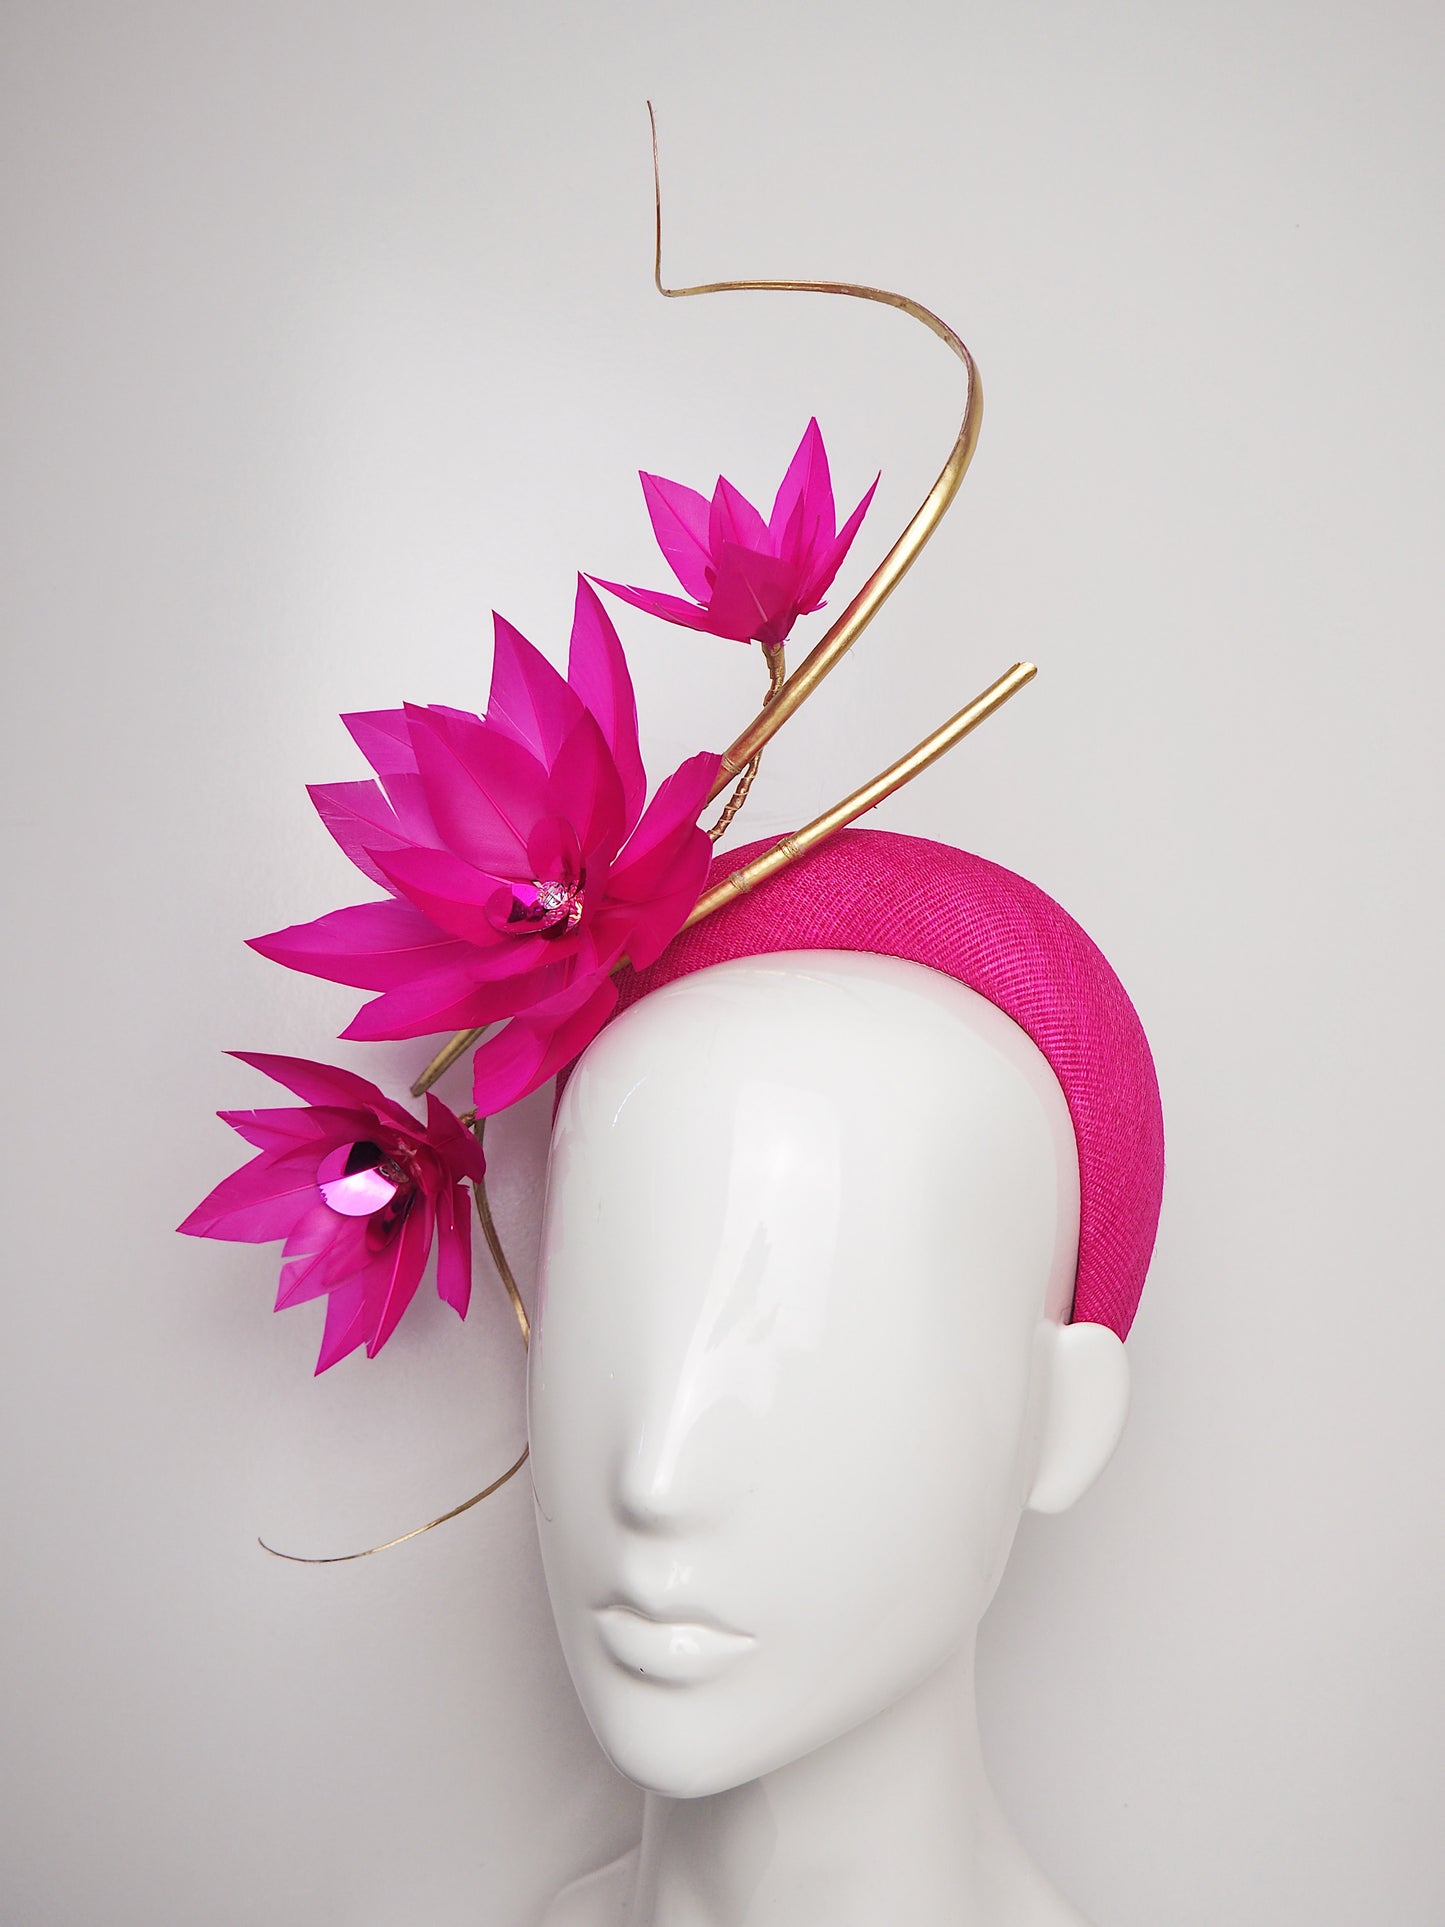 Life of the Party - Vivid pink straw 3D headband with gold quills and feather flowers